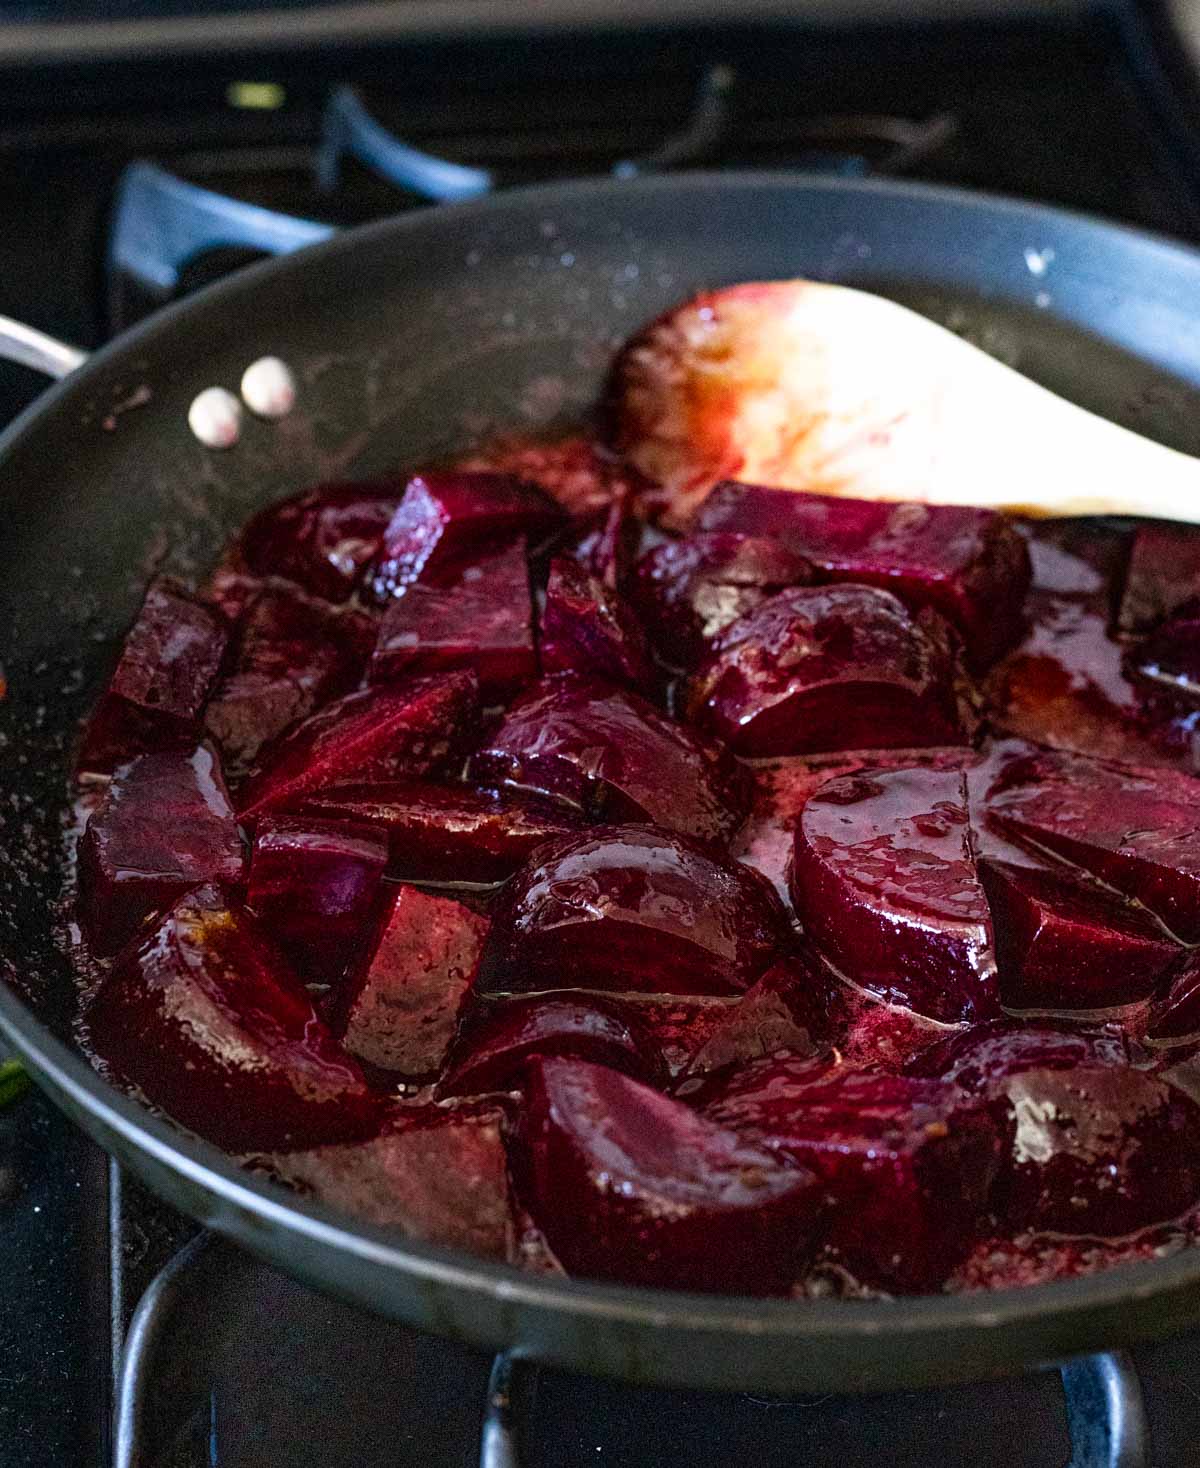 Beets with glaze being cooked in a skillet on the stovetop.